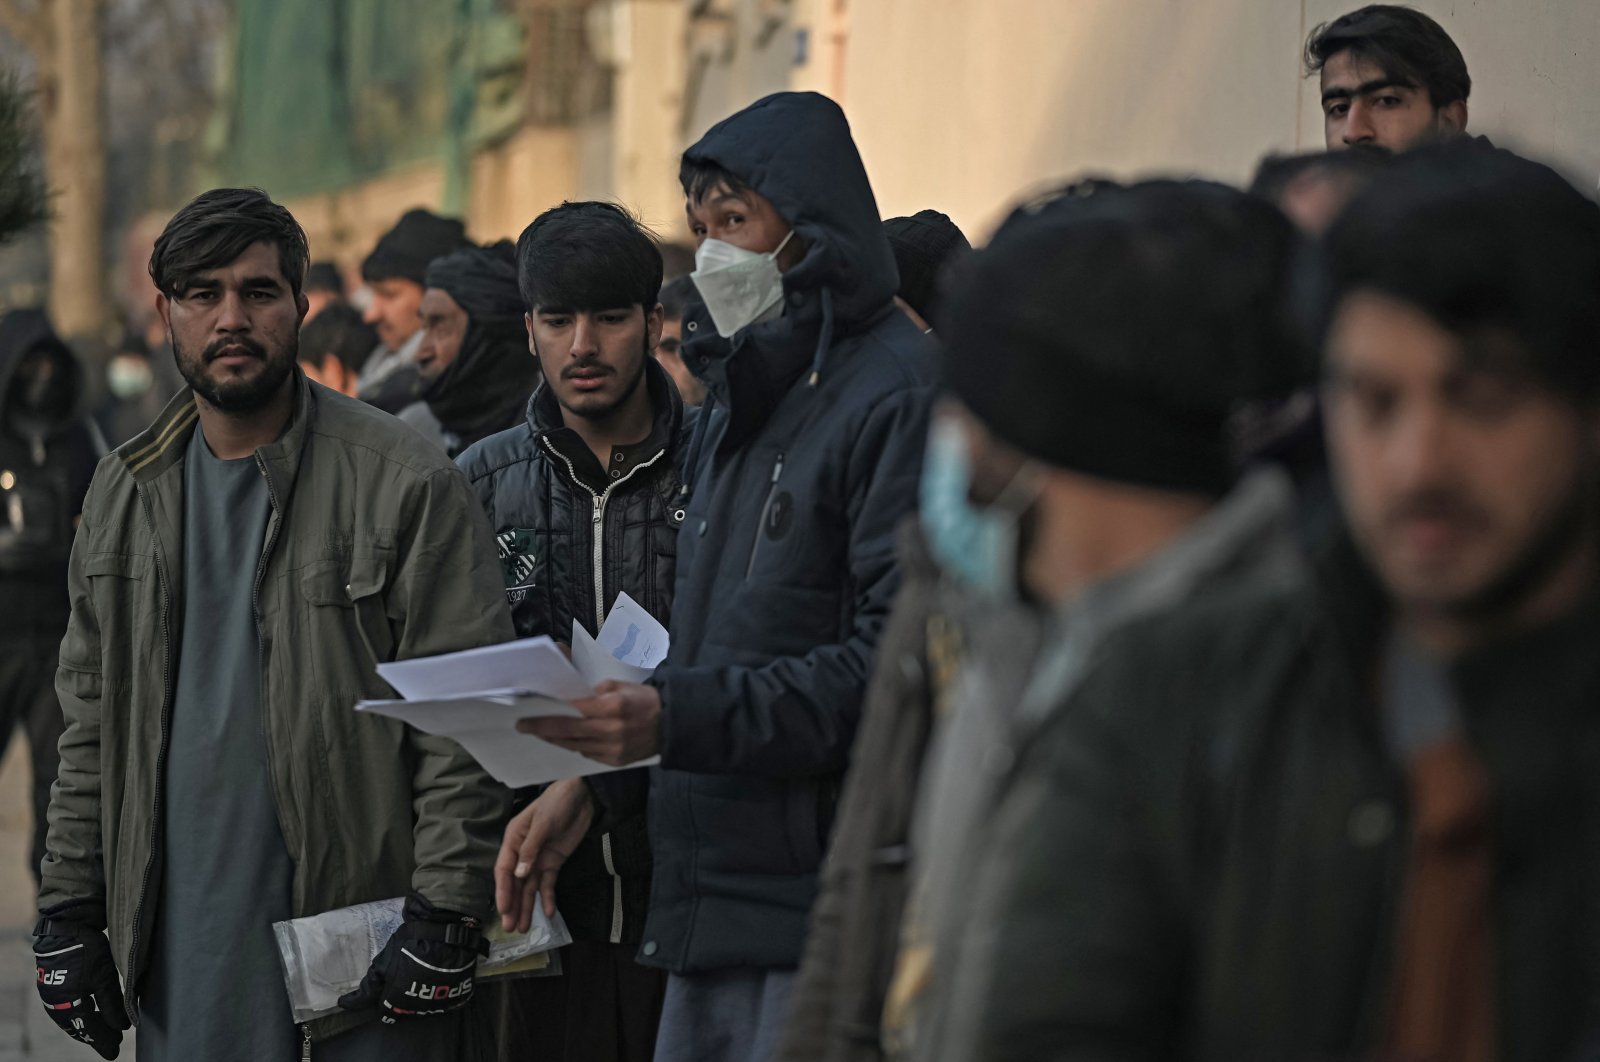 People queue to enter the passport office at a checkpoint in Kabul, Afghanistan, Dec. 19, 2021. (AFP Photo)